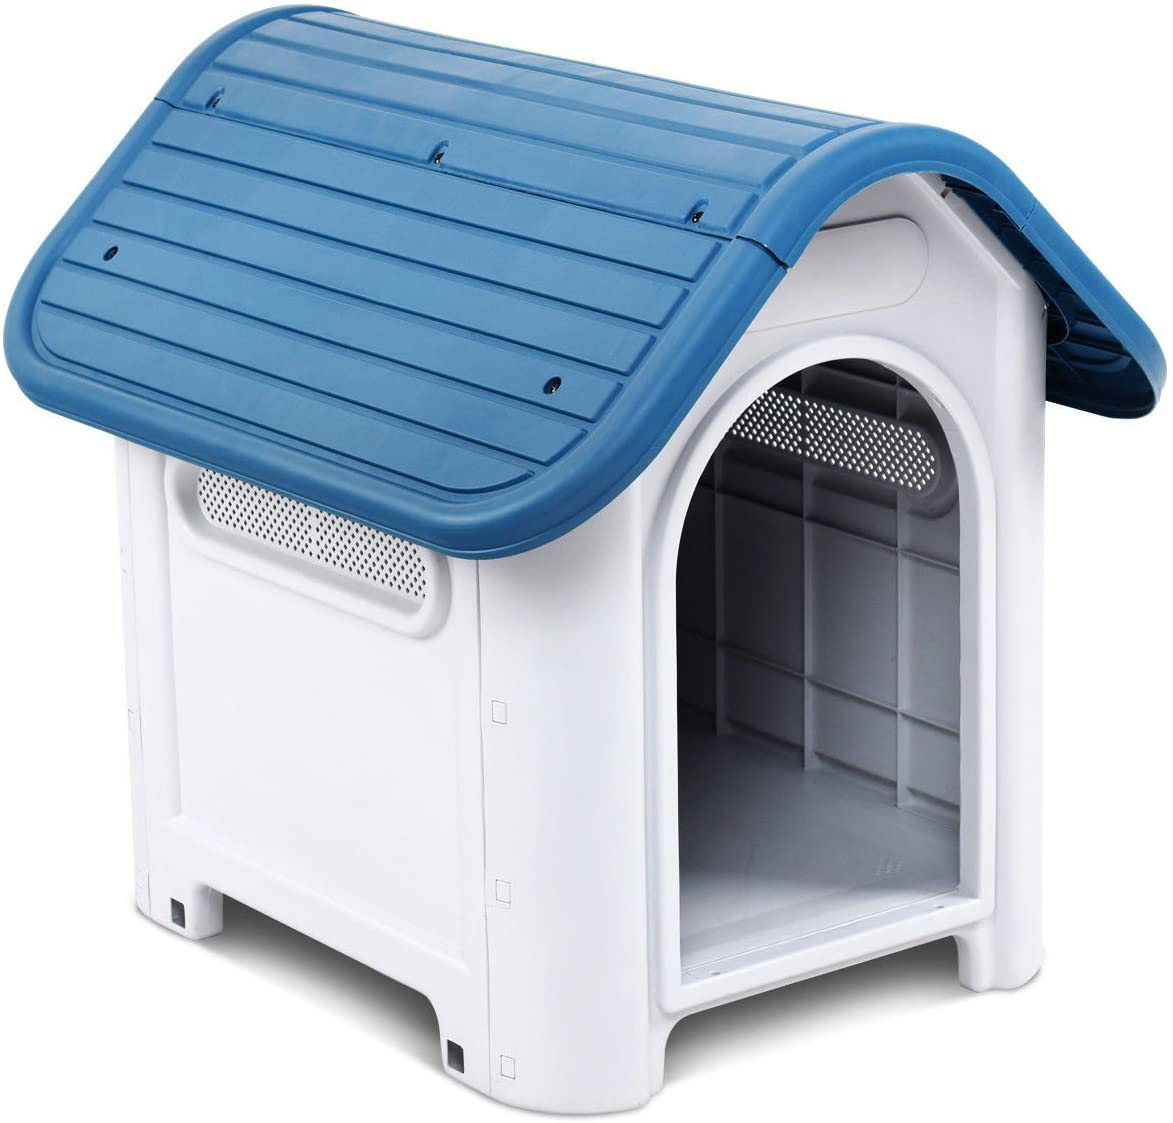 Magshion up to 20 Lb Plastic Outdoor Dog House Pet at Kennel Puppy Shelter